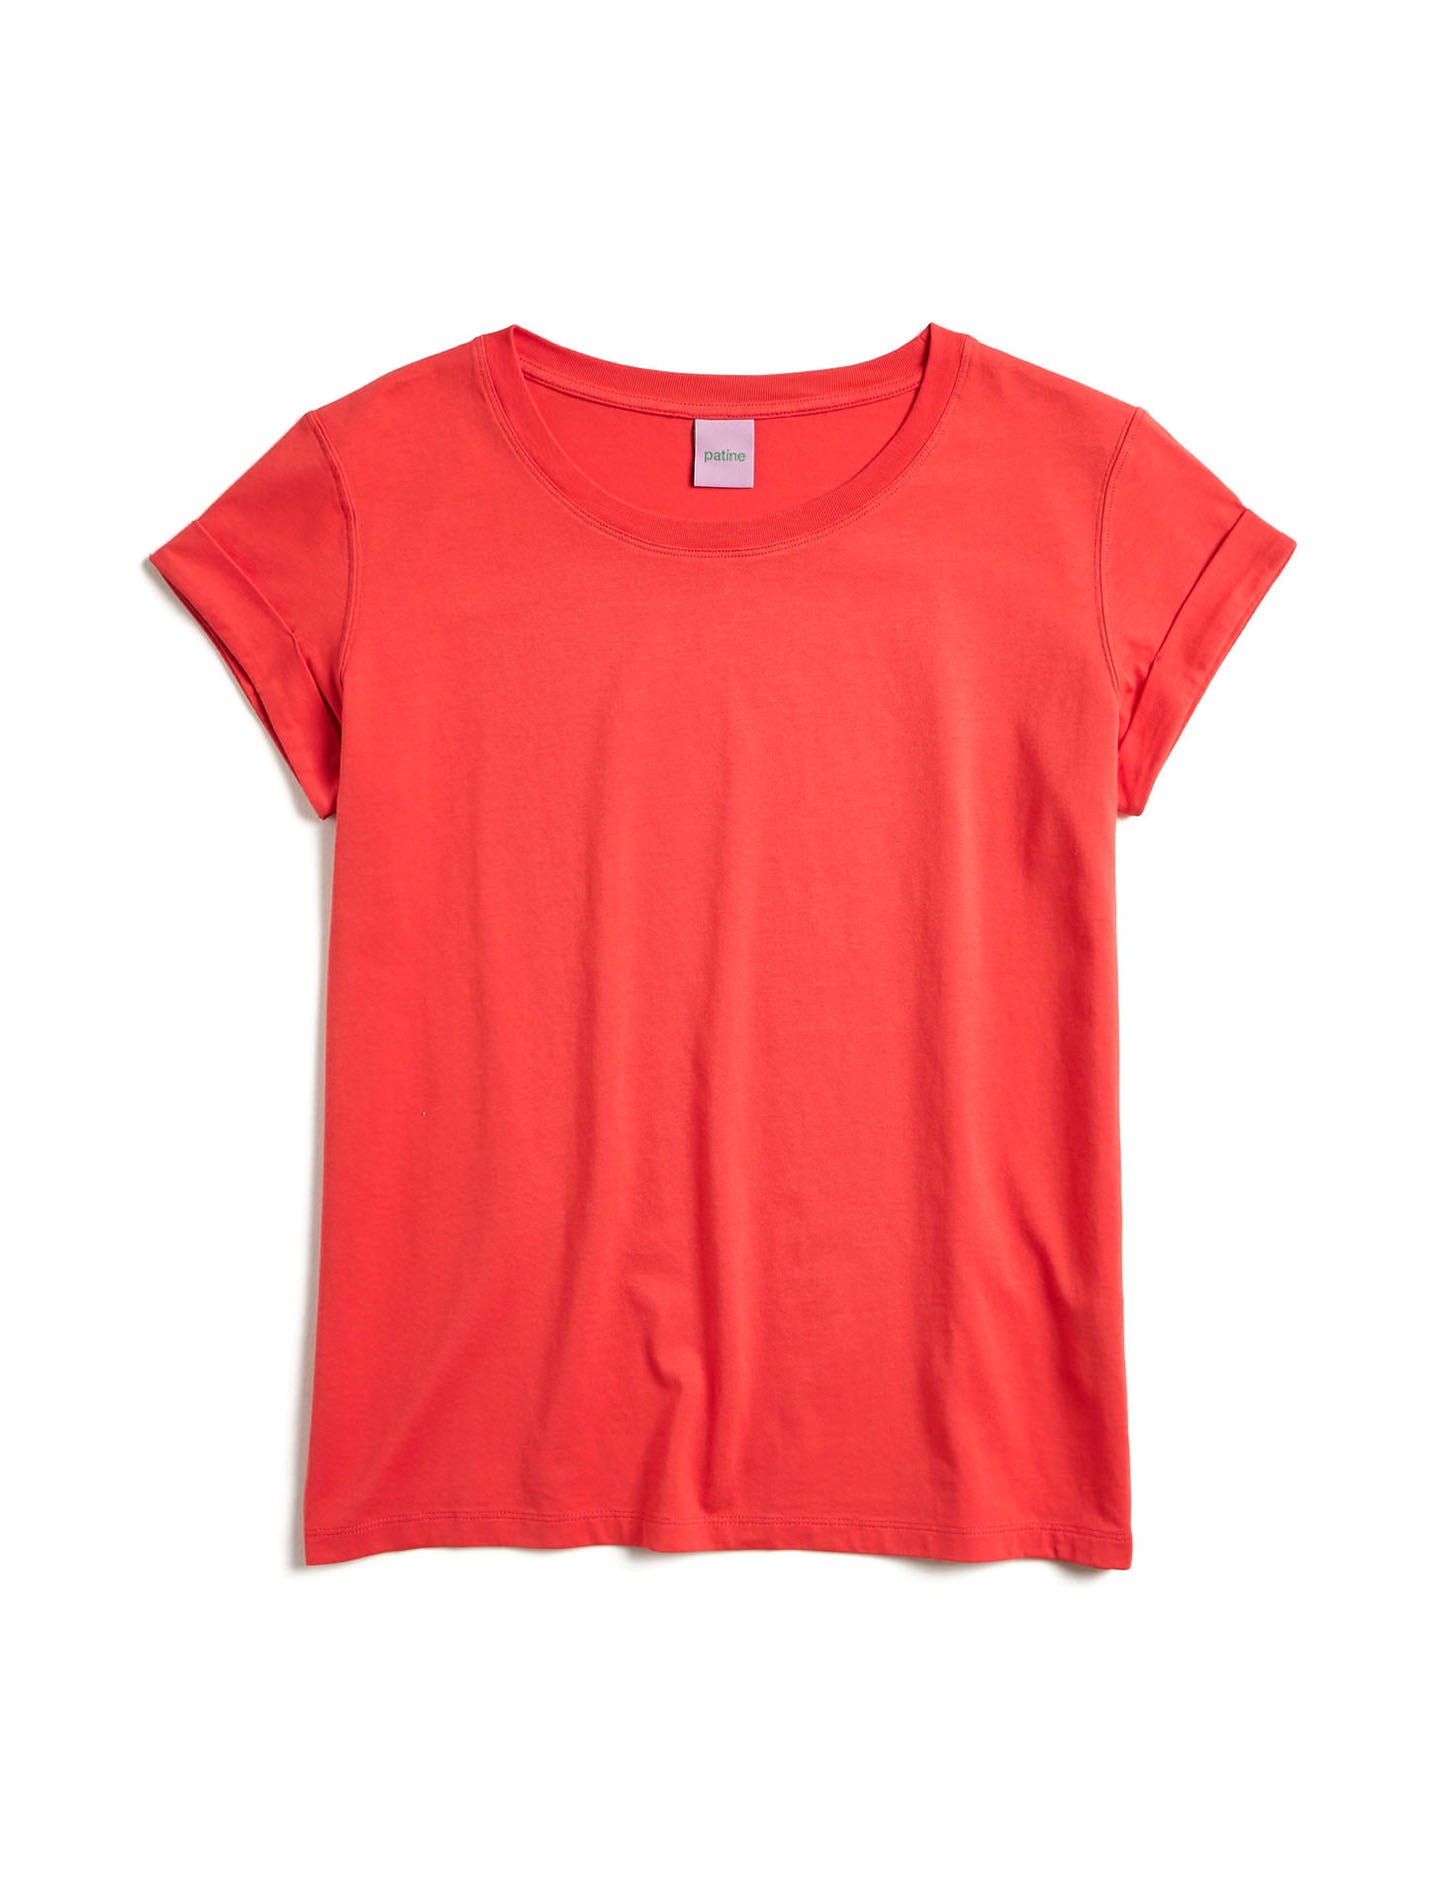 Le tee-shirt Cool Willie® jersey bio-recyclé Rouge tomato